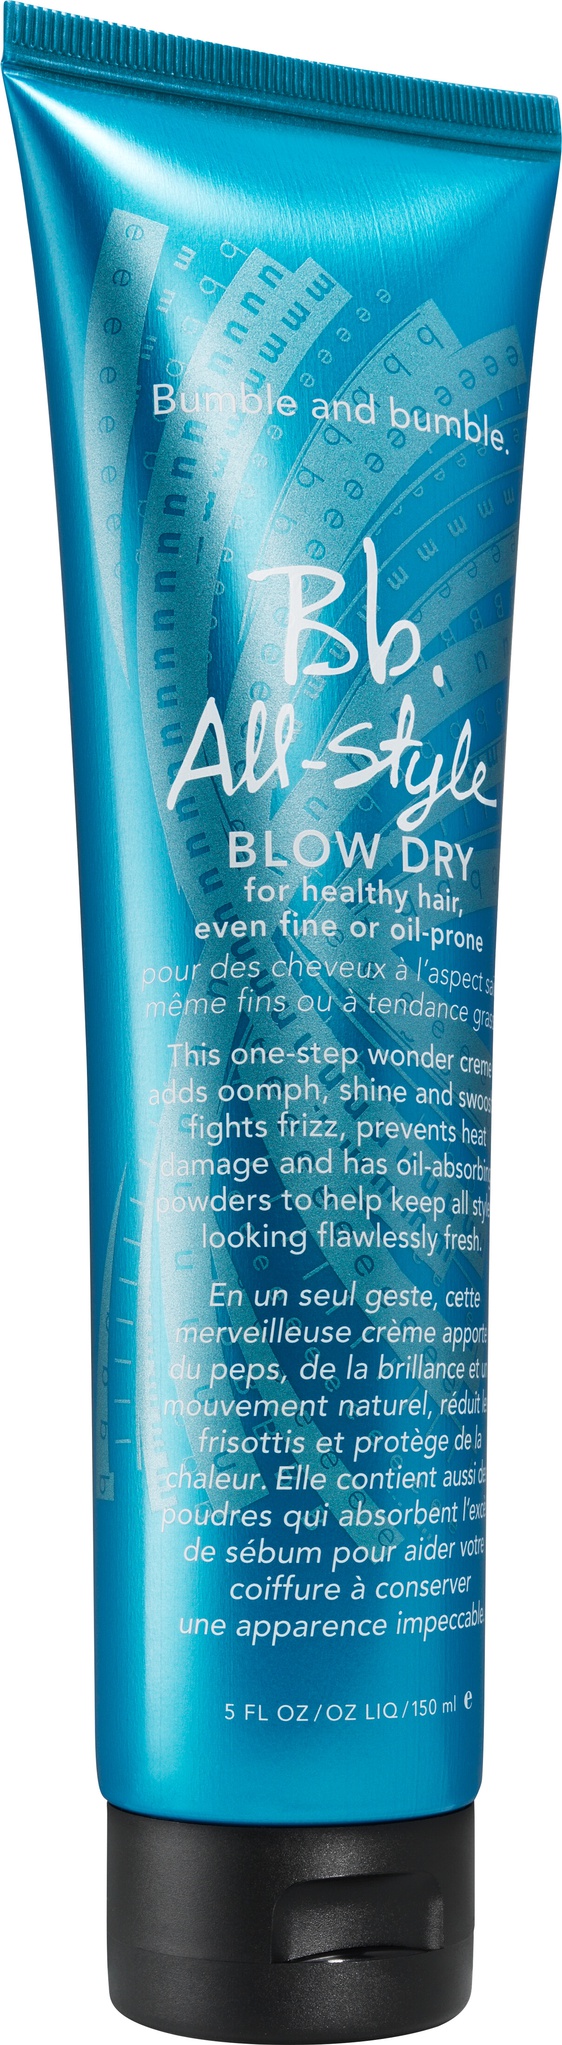 Bumble And Bumble All-style Blow Dry